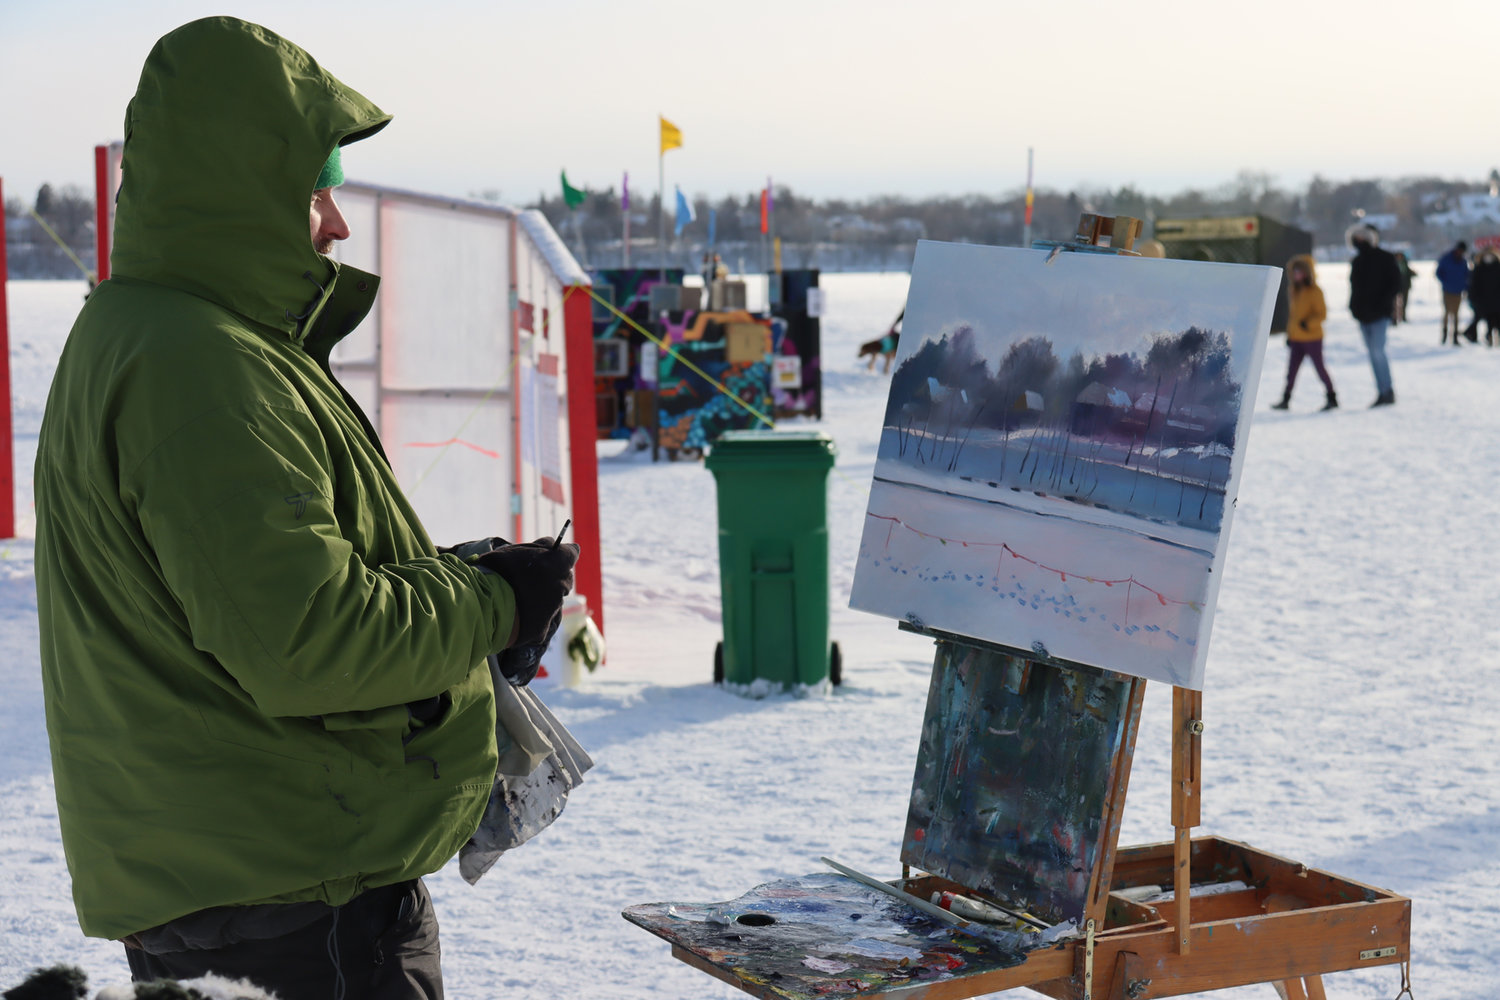 Tadas Kosciuska paints on-ice at Bde Unma /Lake Harriet for the first time on Sunday, Jan. 23, 2022. He’s a member of the Outdoor Painters of Minnesota, which arranges group paint-outs at scenic locations. (Photo by Tesha M. Christensen)